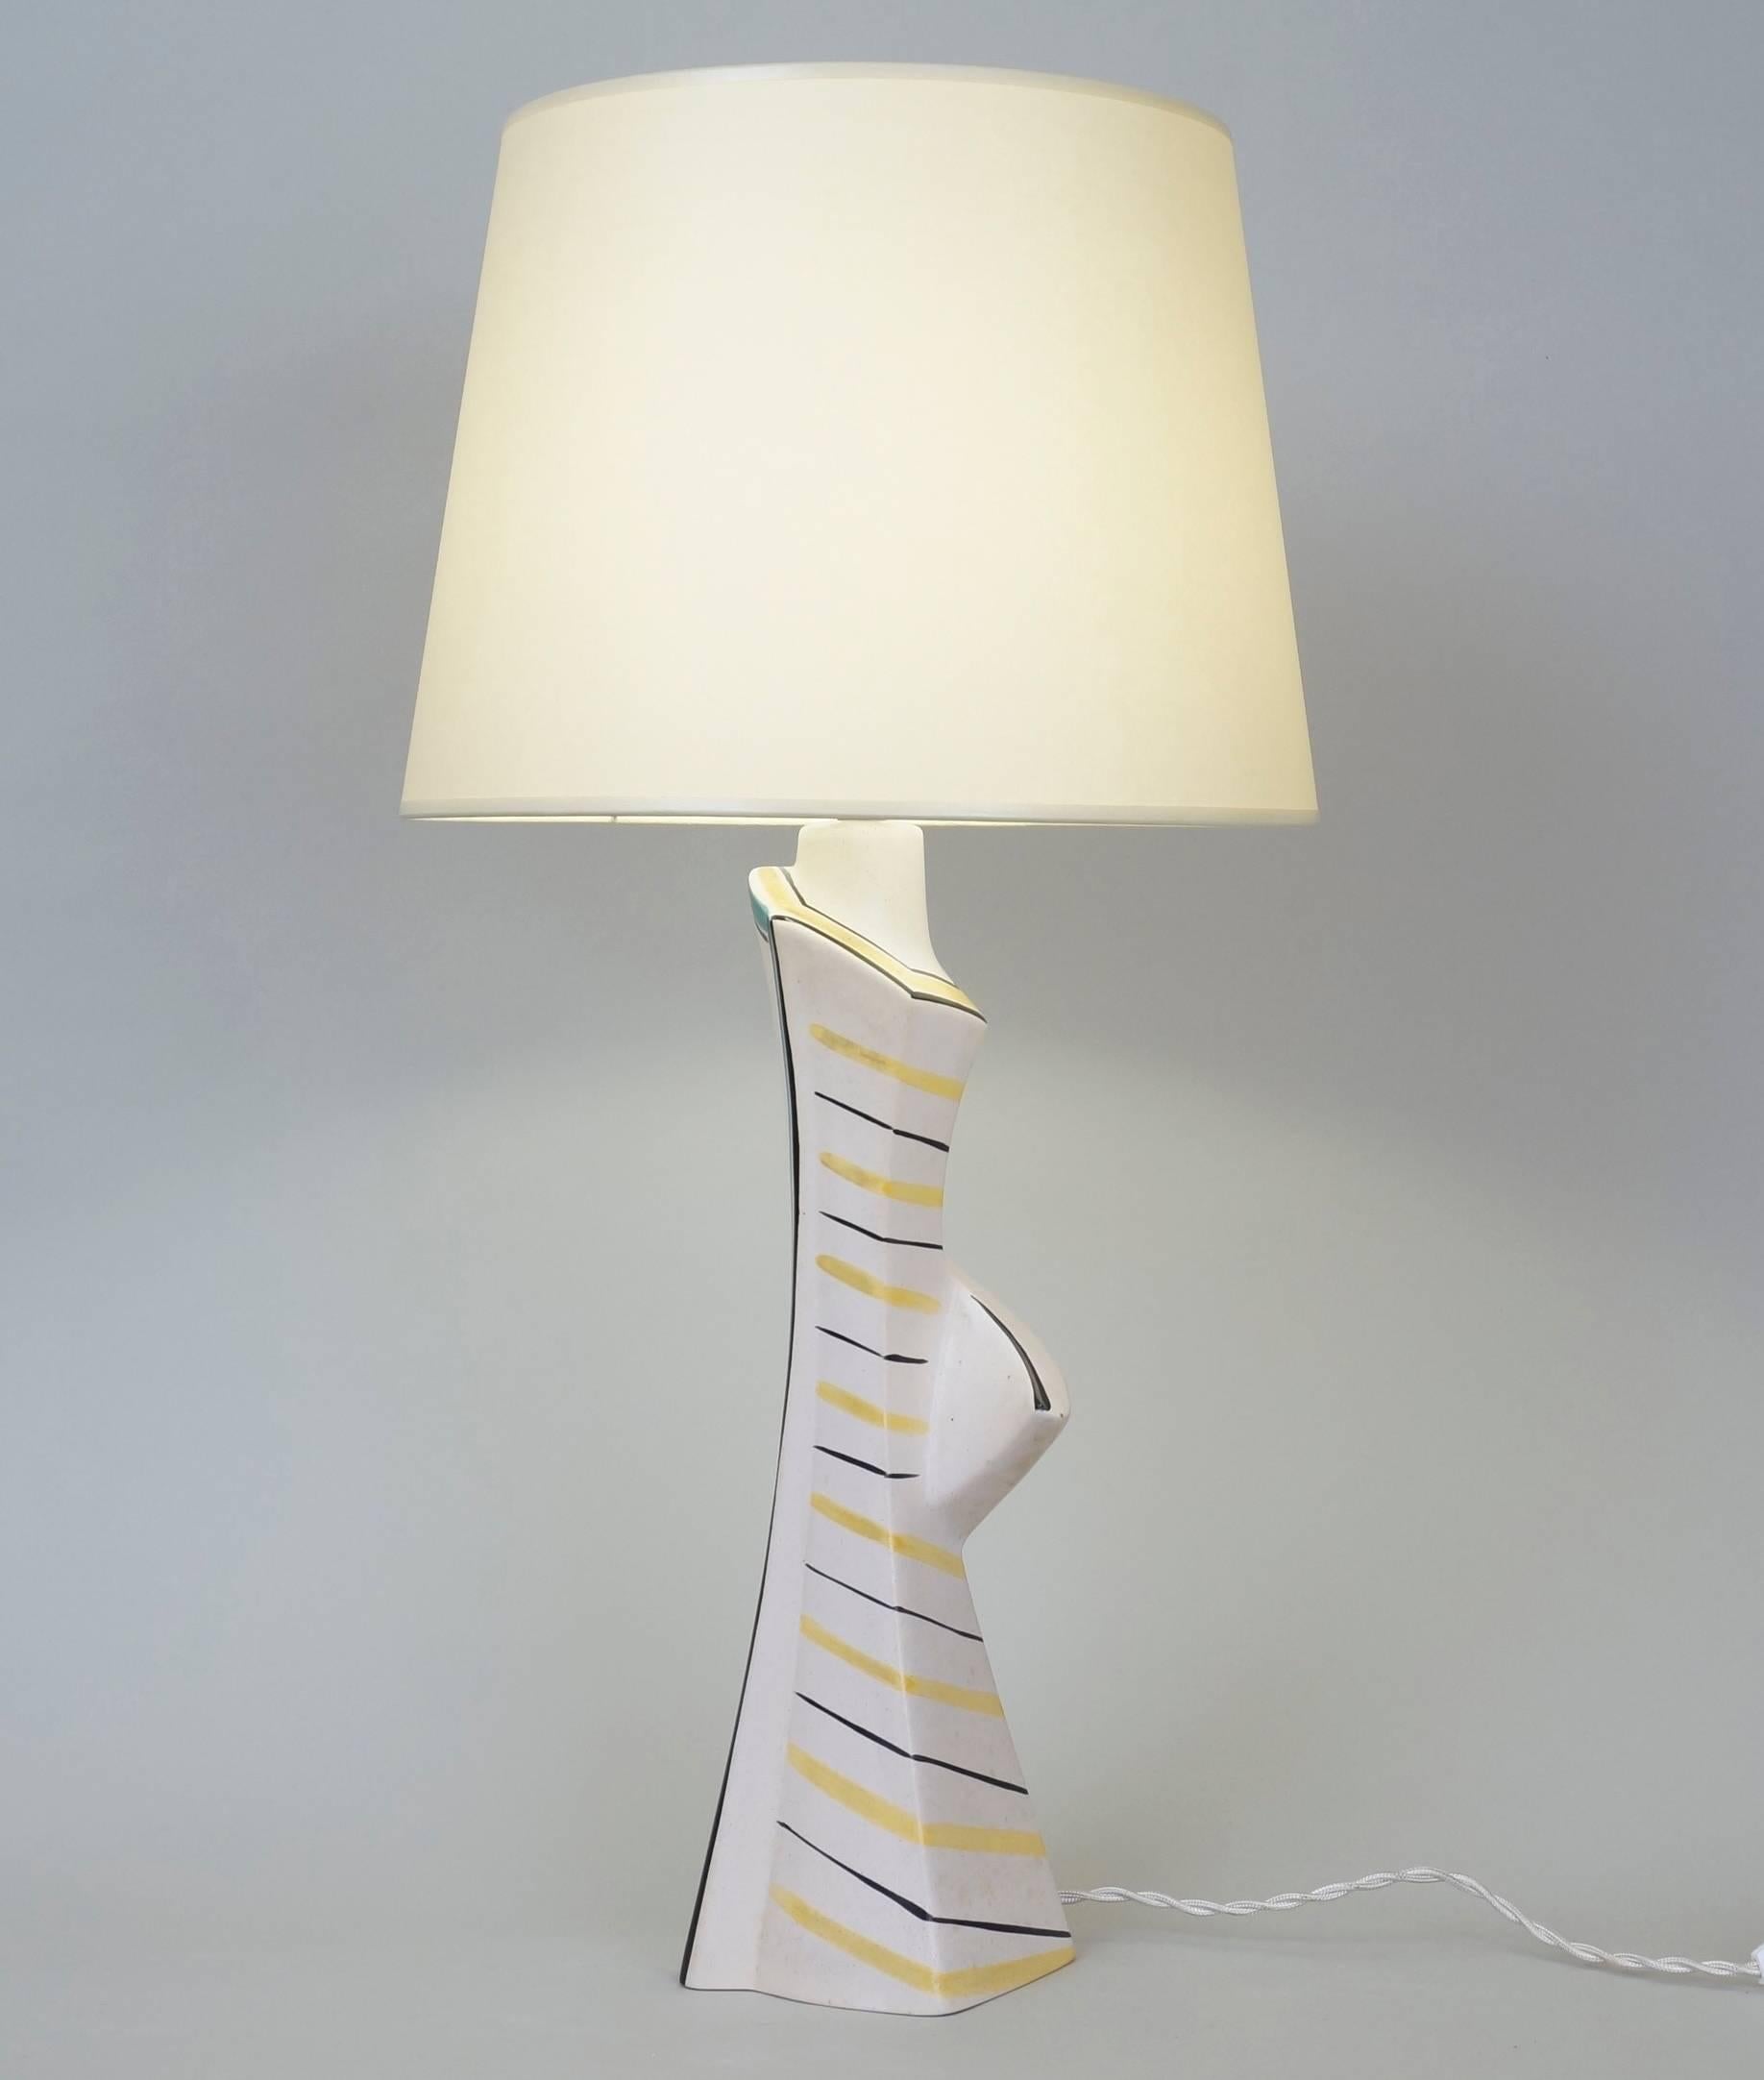 Multi-color ceramic table lamp.
Custom-made fabric lampshades.
Rewired with twisted silk cord.
US standard plug on request.
Measures: Ceramic height 36 cm - 14.2 in.
Height with lampshade 56 cm - 22 in.
      